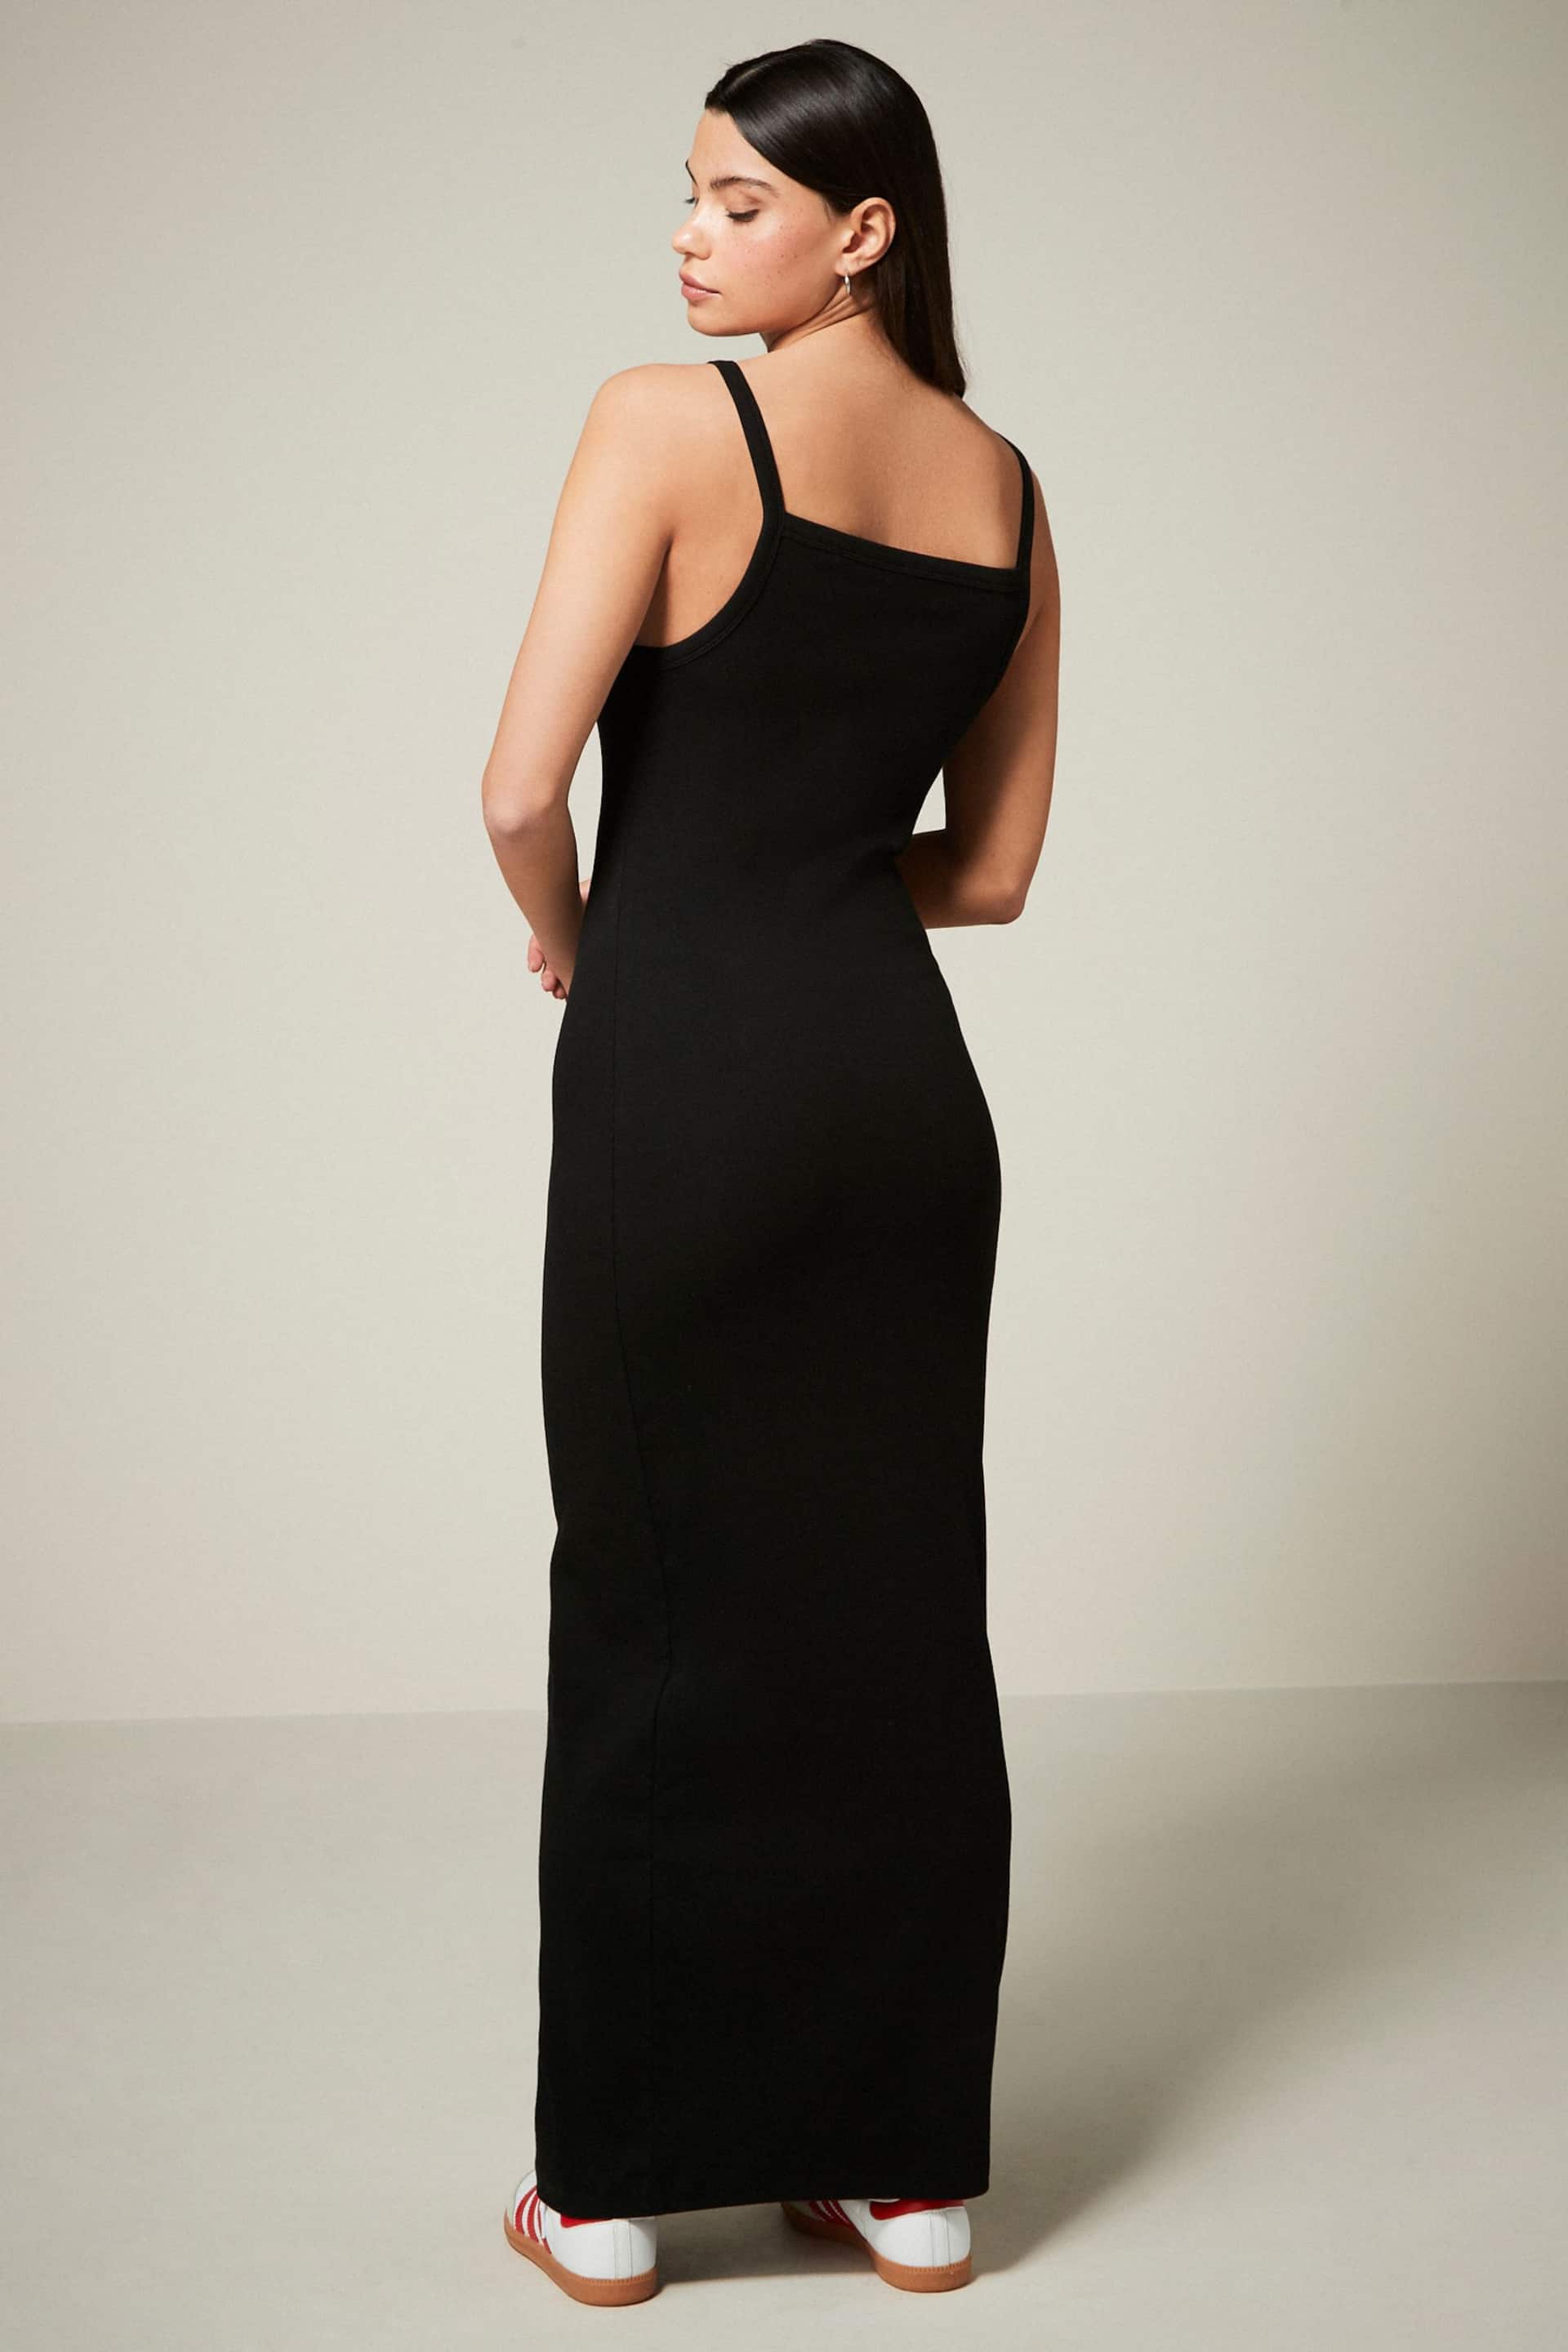 Black Strappy Ribbed Maxi Dress - Image 3 of 6